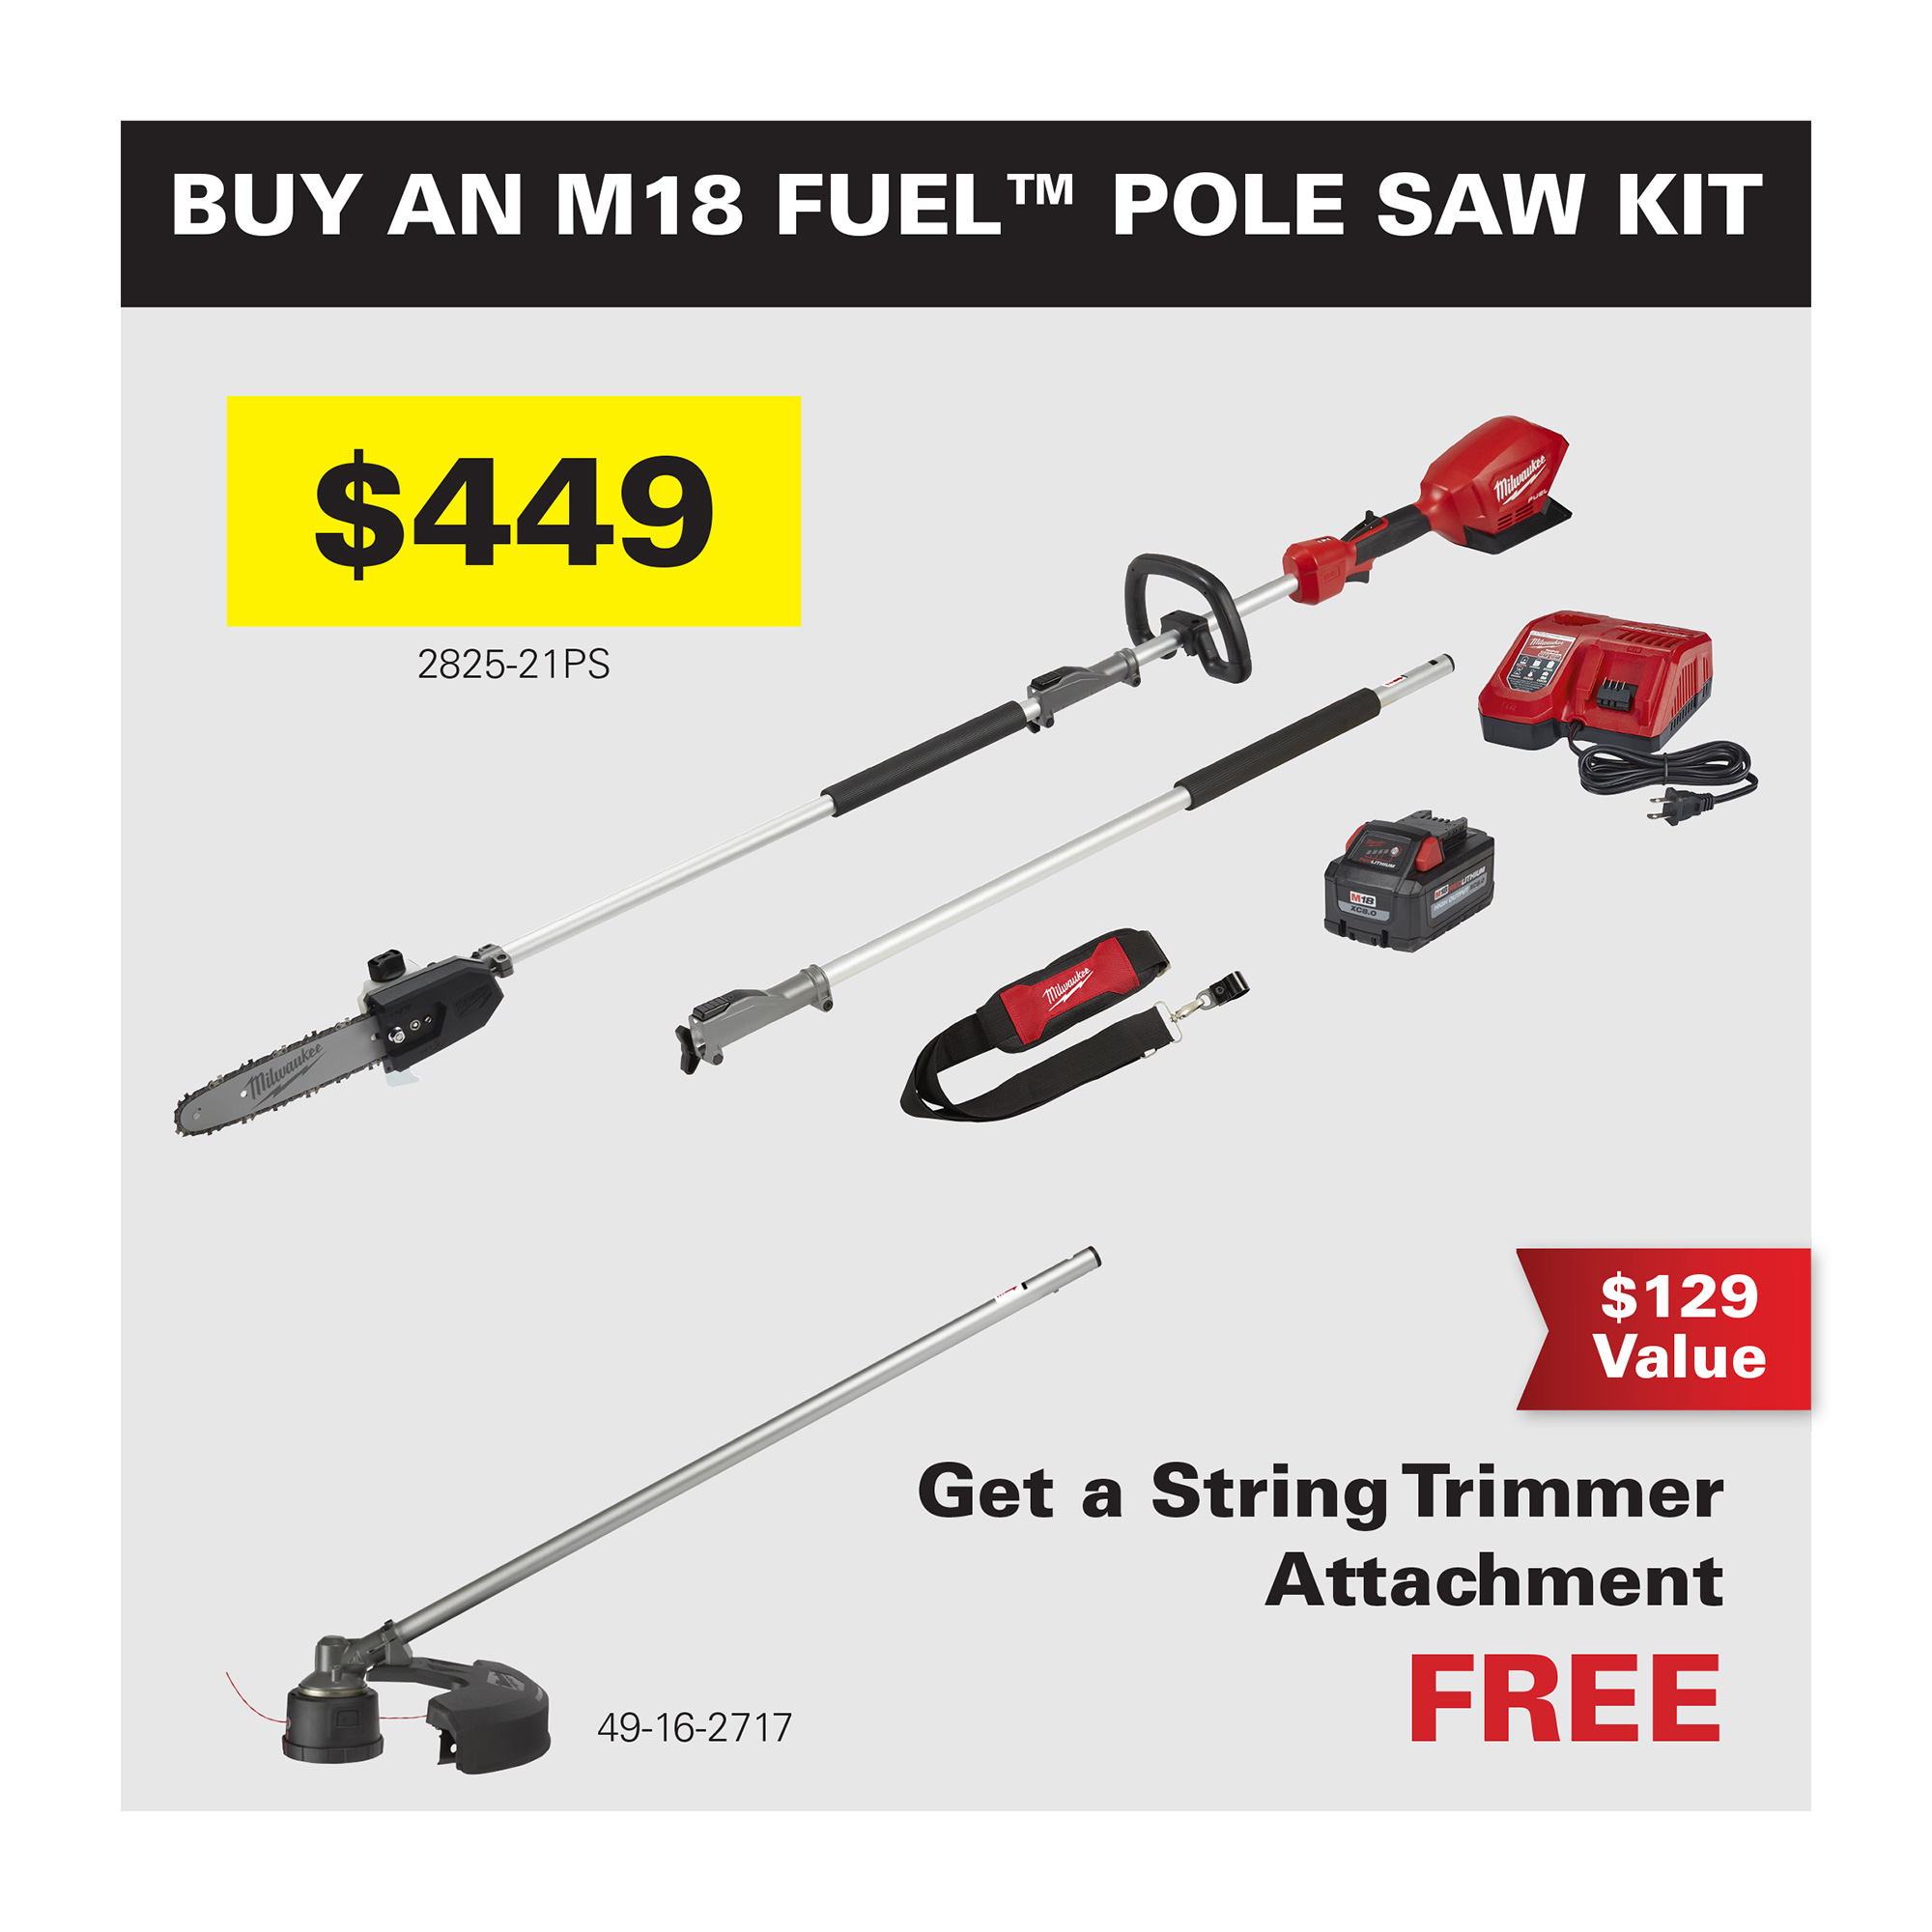 Milwaukee M18 Pole Saw Kit Receive Free String Trimmer Attachment